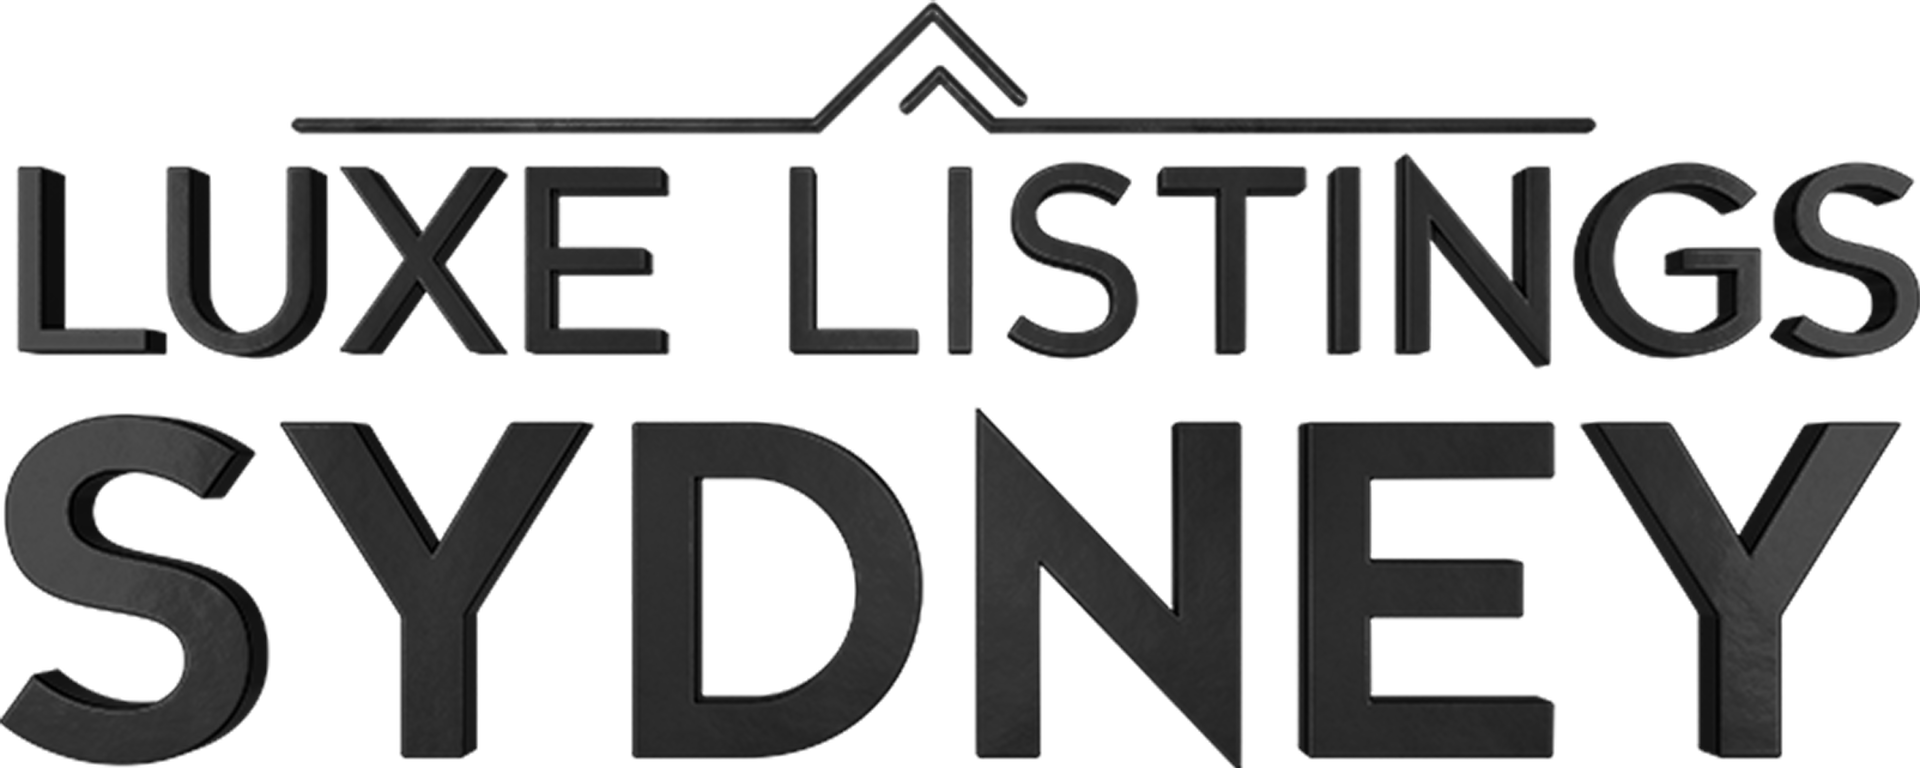 The image shows a logo with the text "Luxe Listings Sydney" in bold, uppercase letters. The word "Luxe" is stacked above "Listings," which is stacked above "Sydney," all in black text. A stylized geometric shape resembling a pyramid or triangle, reminiscent of the best duplex designs by a Sydney architect, is positioned above the text.